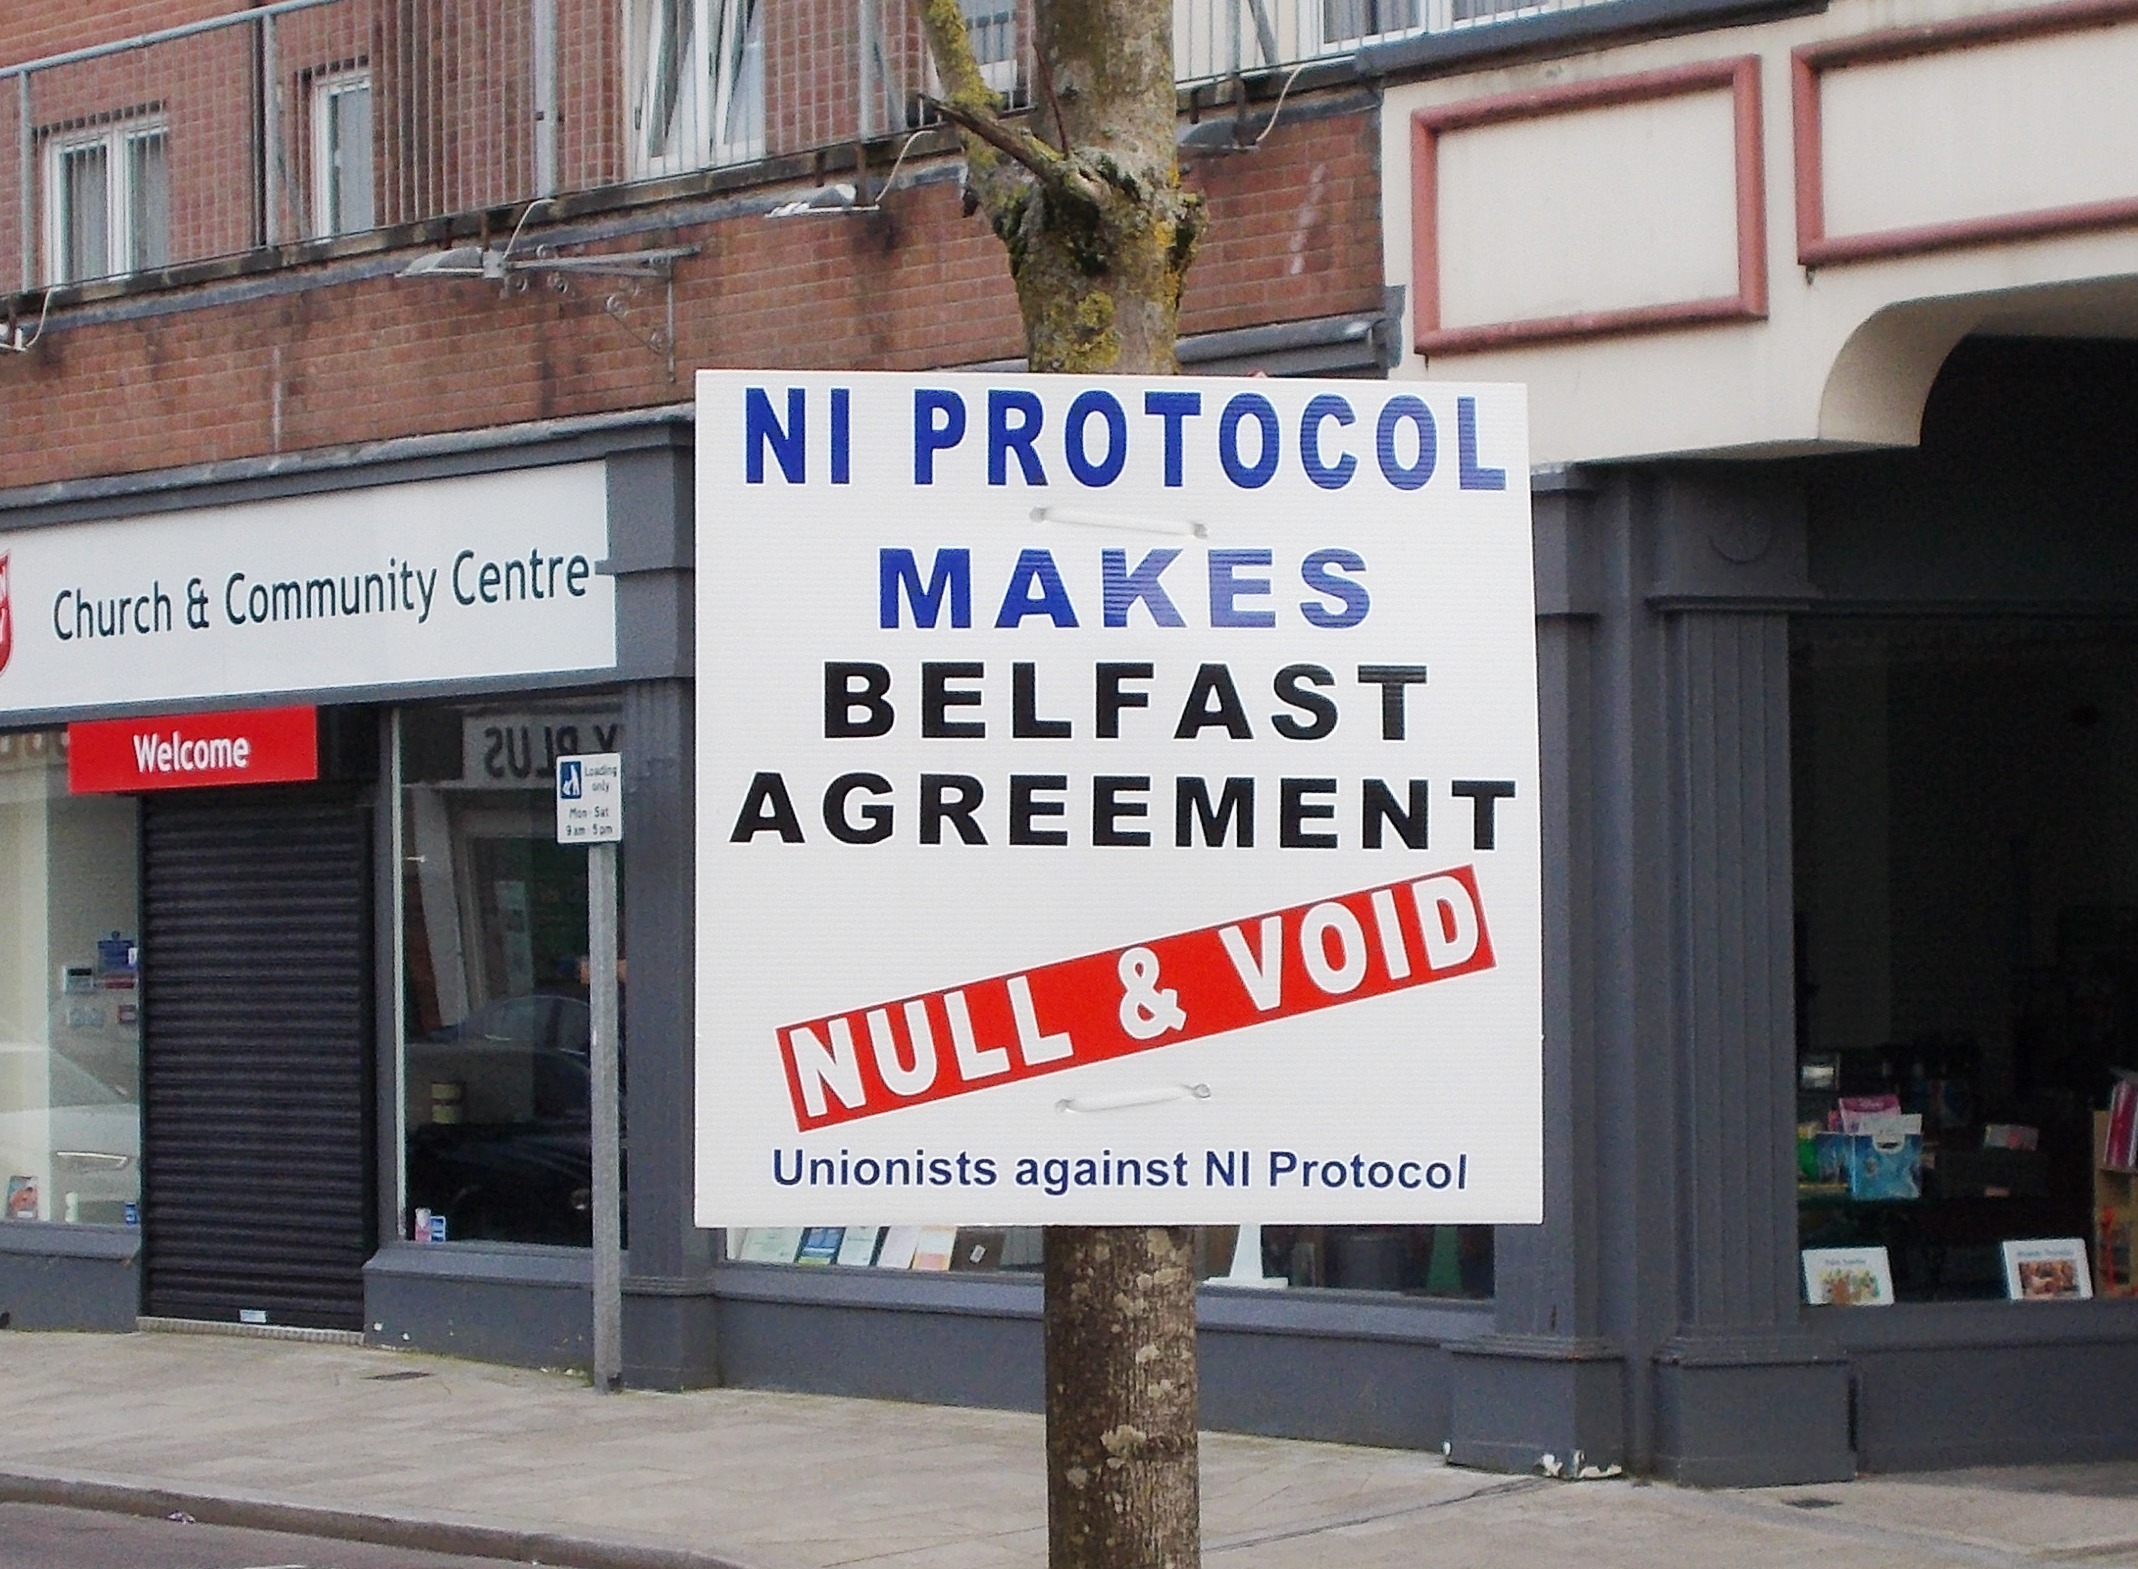 A sign in Larne saying "NI Protocol Makes Belfast Agreement Null & Void"